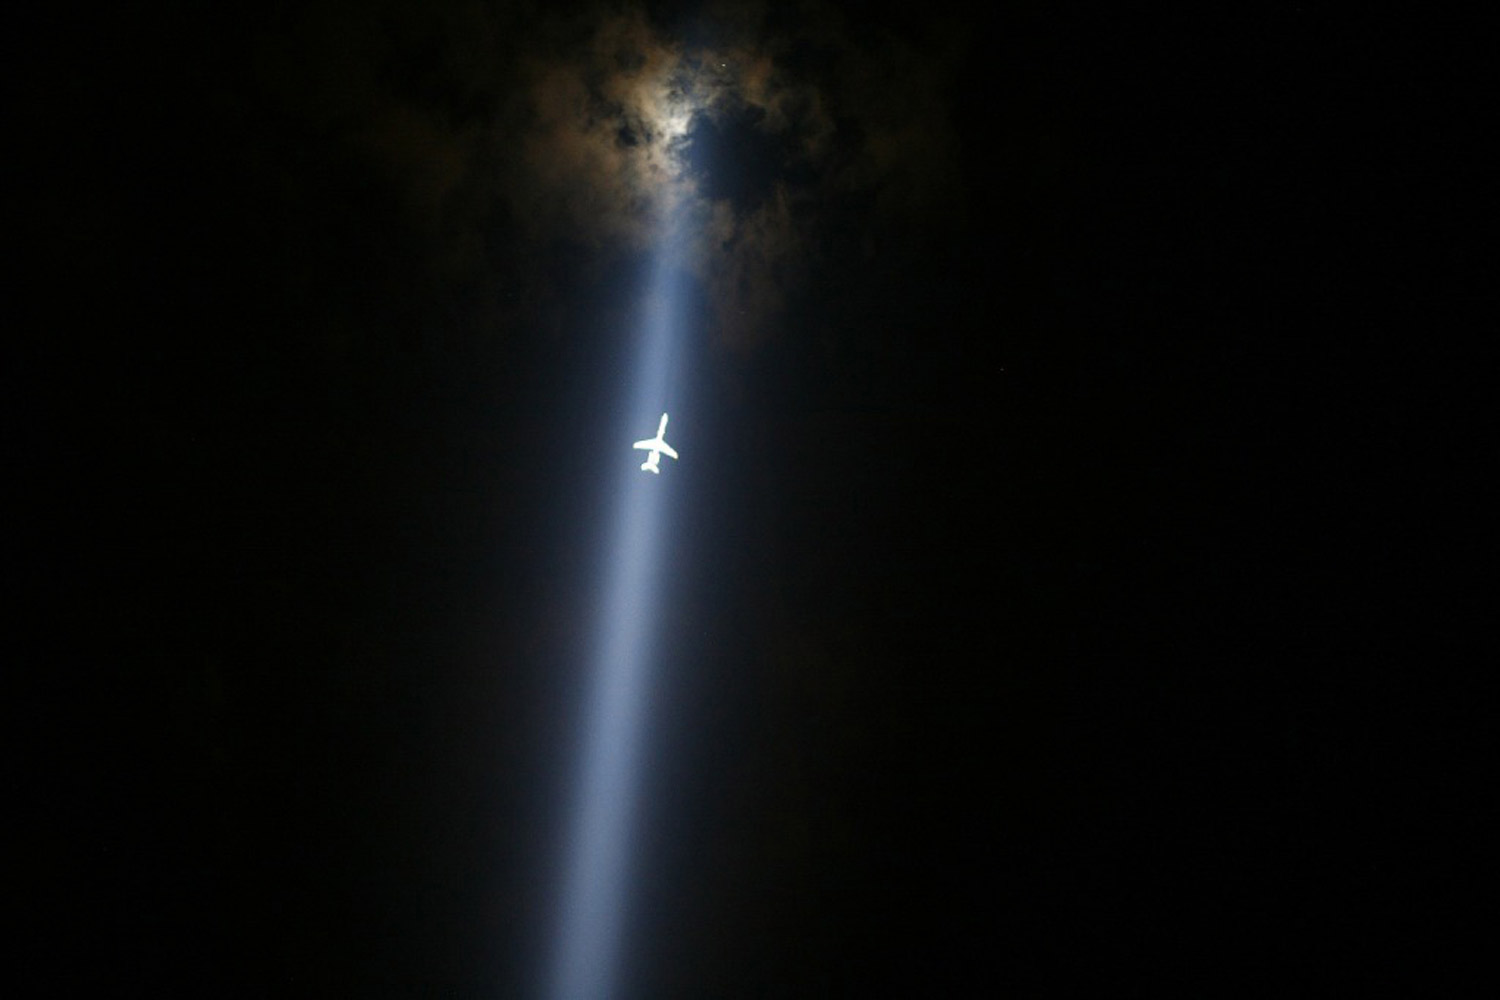 September 10, 2011. A plane flies through the  Tribute in Lights  in lower Manhattan in New York. New York marked the 10th anniversary of the 9/11 attacks on the World Trade Center this year.